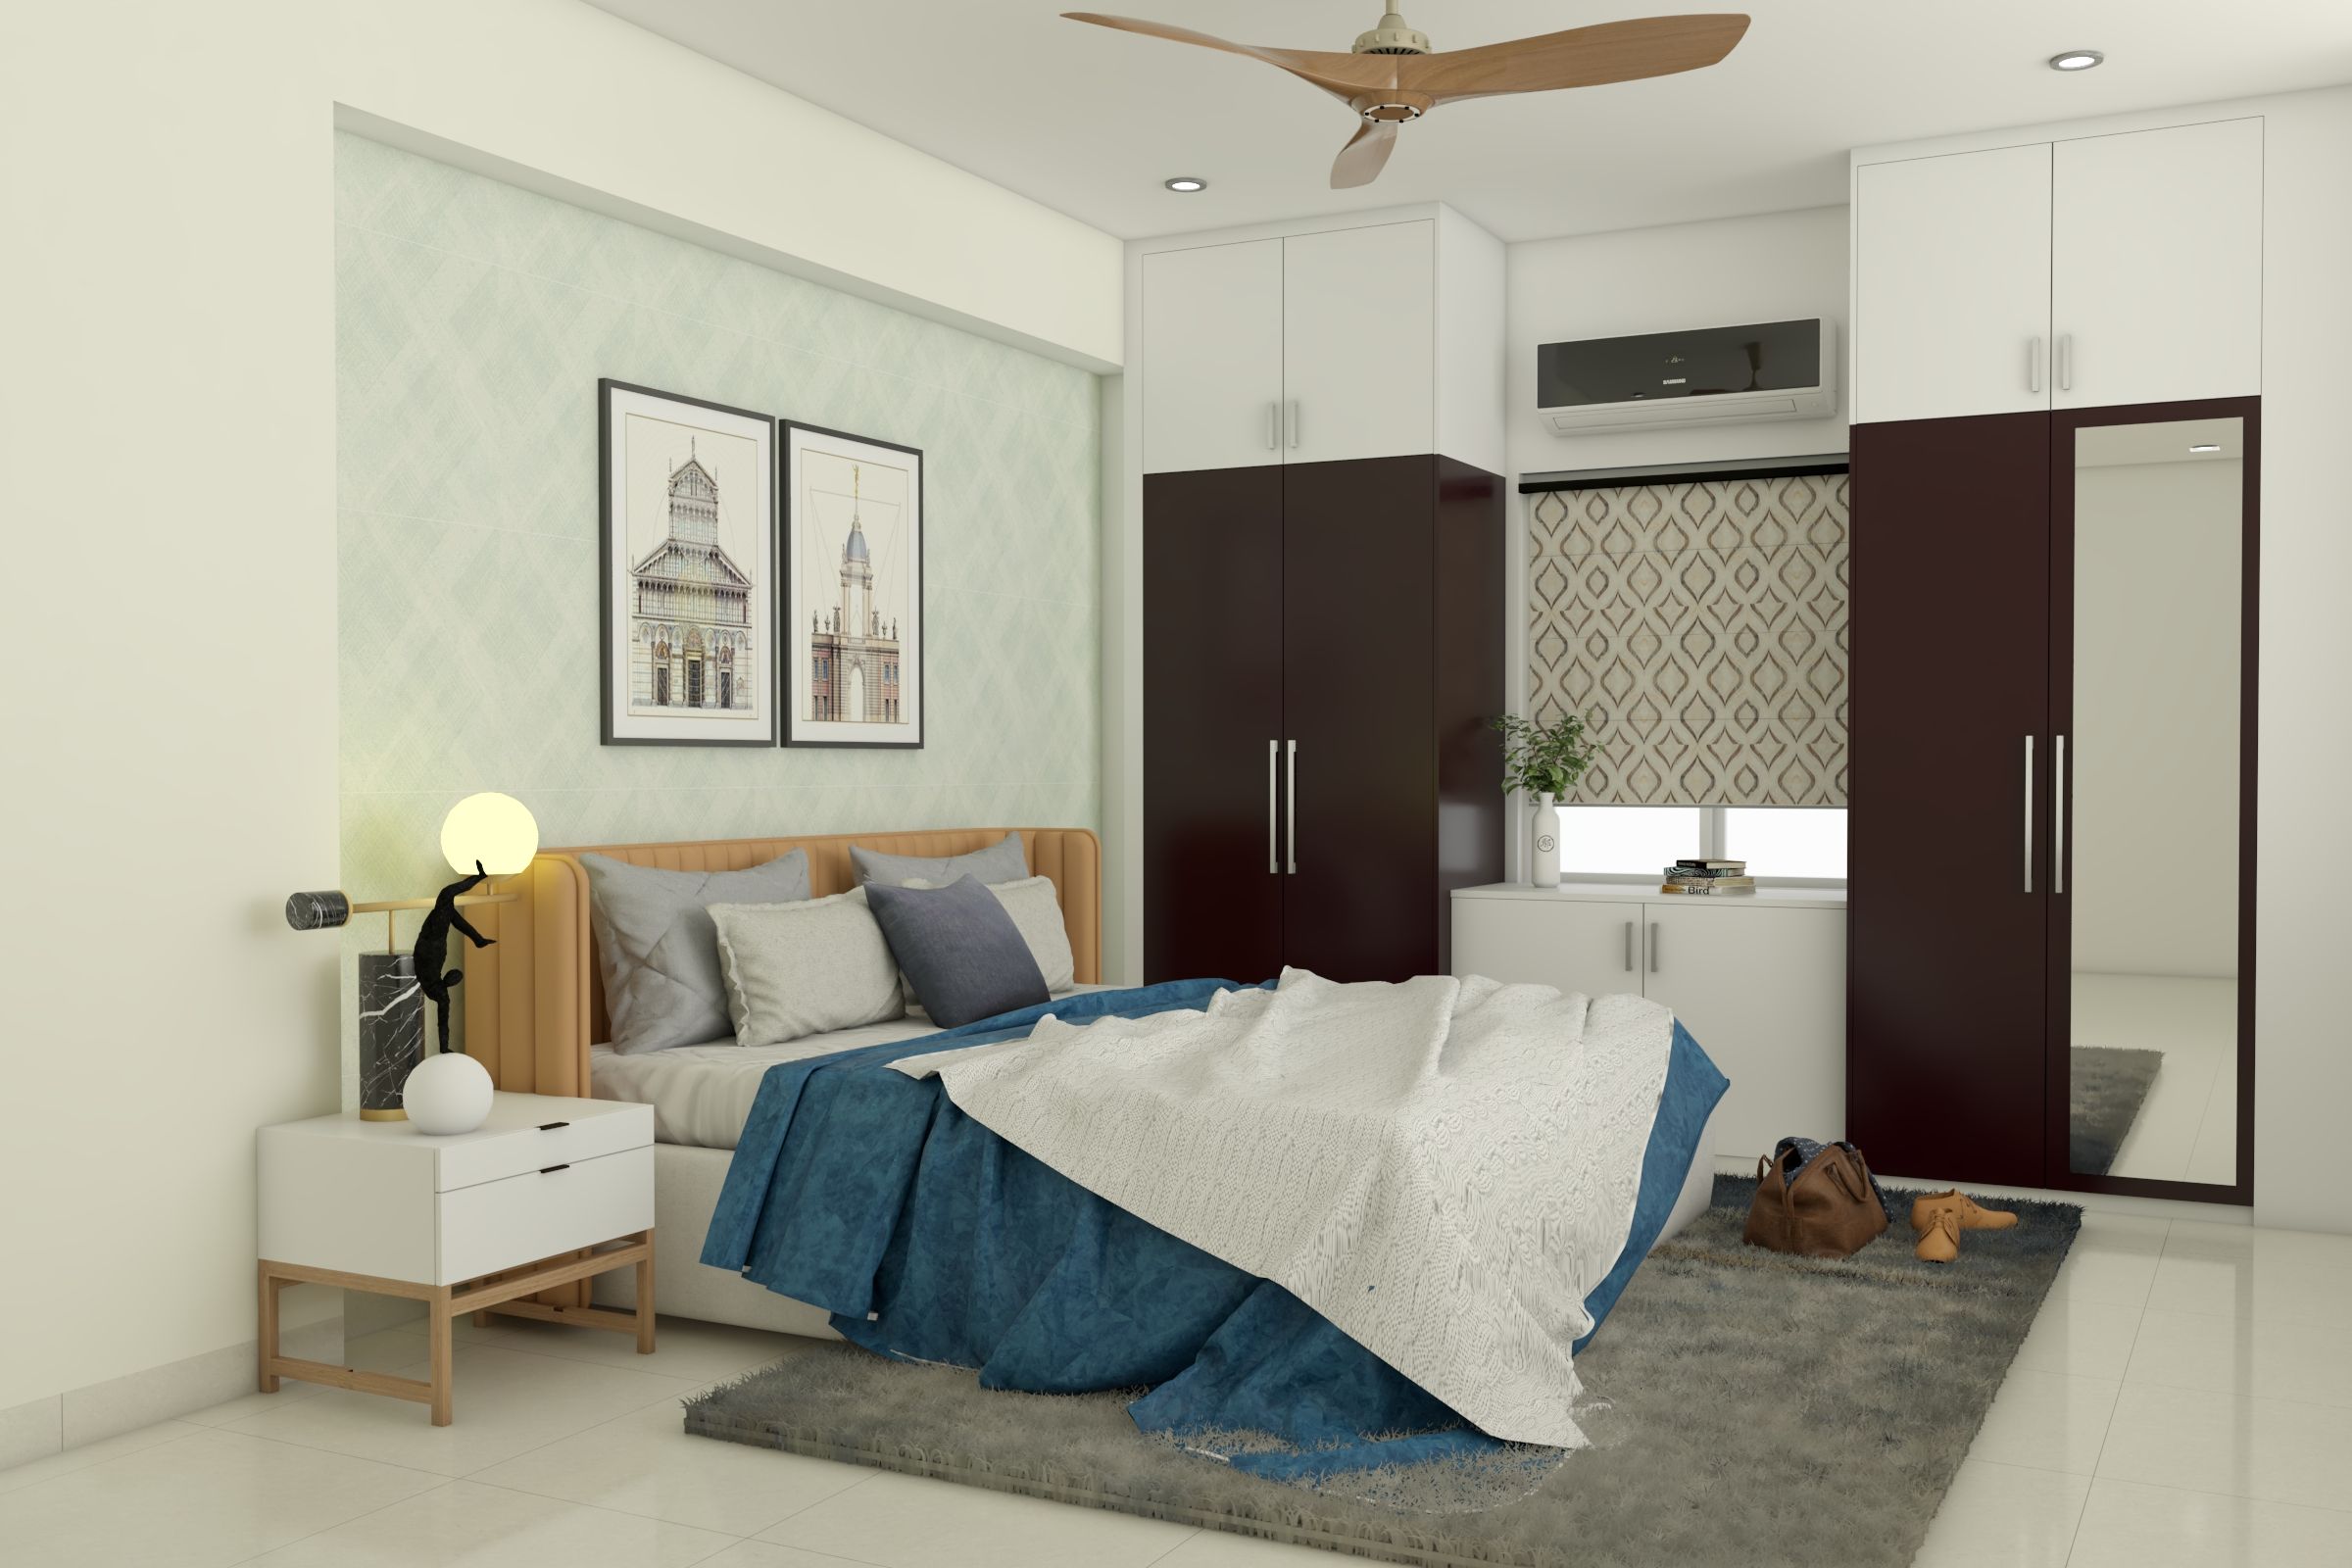 Contemporary Master Bedroom Design With Storage Unit